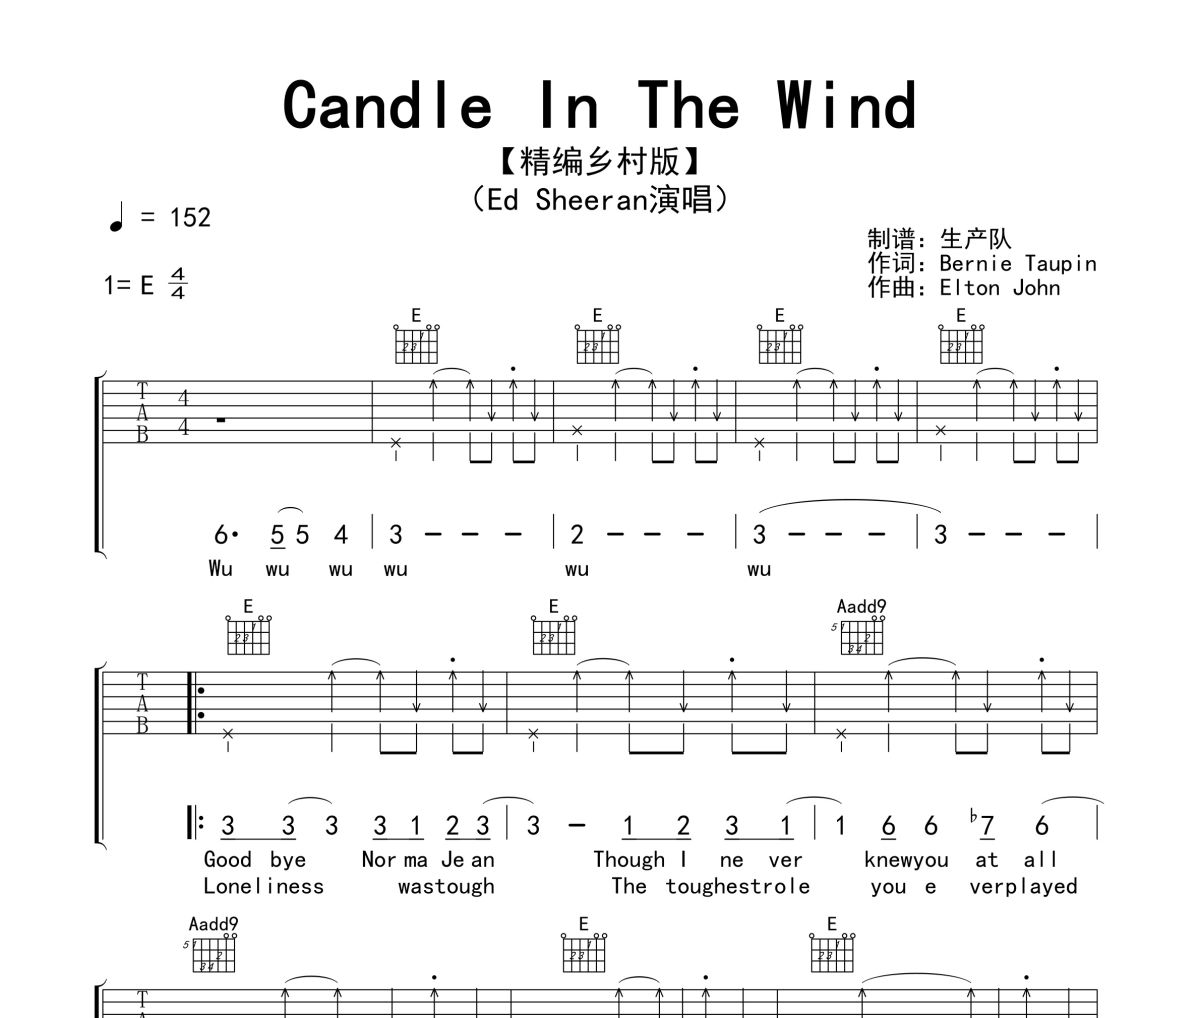 Candle In The Wind吉他谱 Ed Sheeran《Candle In The Wind》六线谱|吉他谱